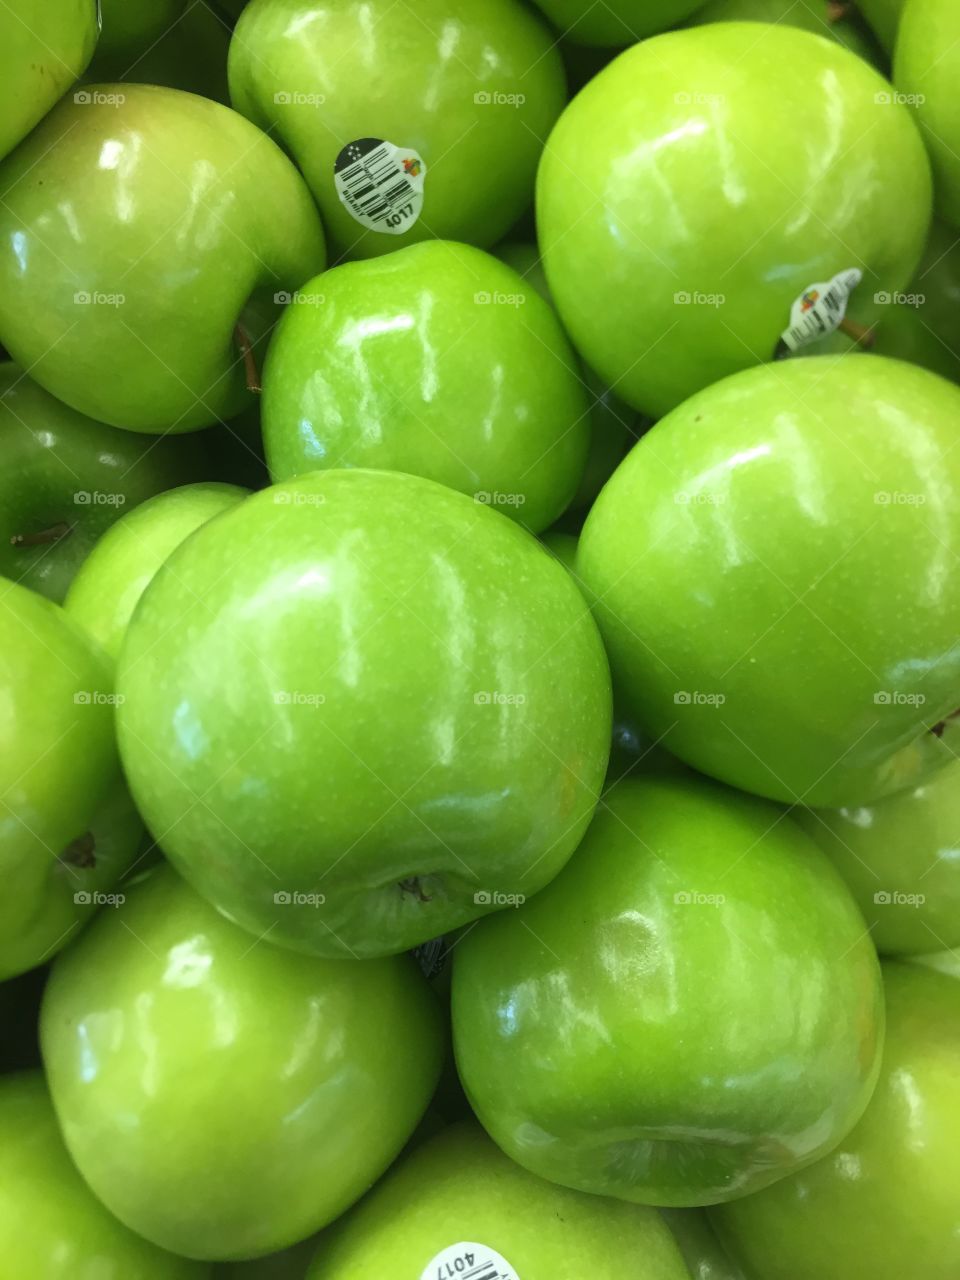 Beautiful polished apples so pleasing to the eye and granny Smith the most delicious